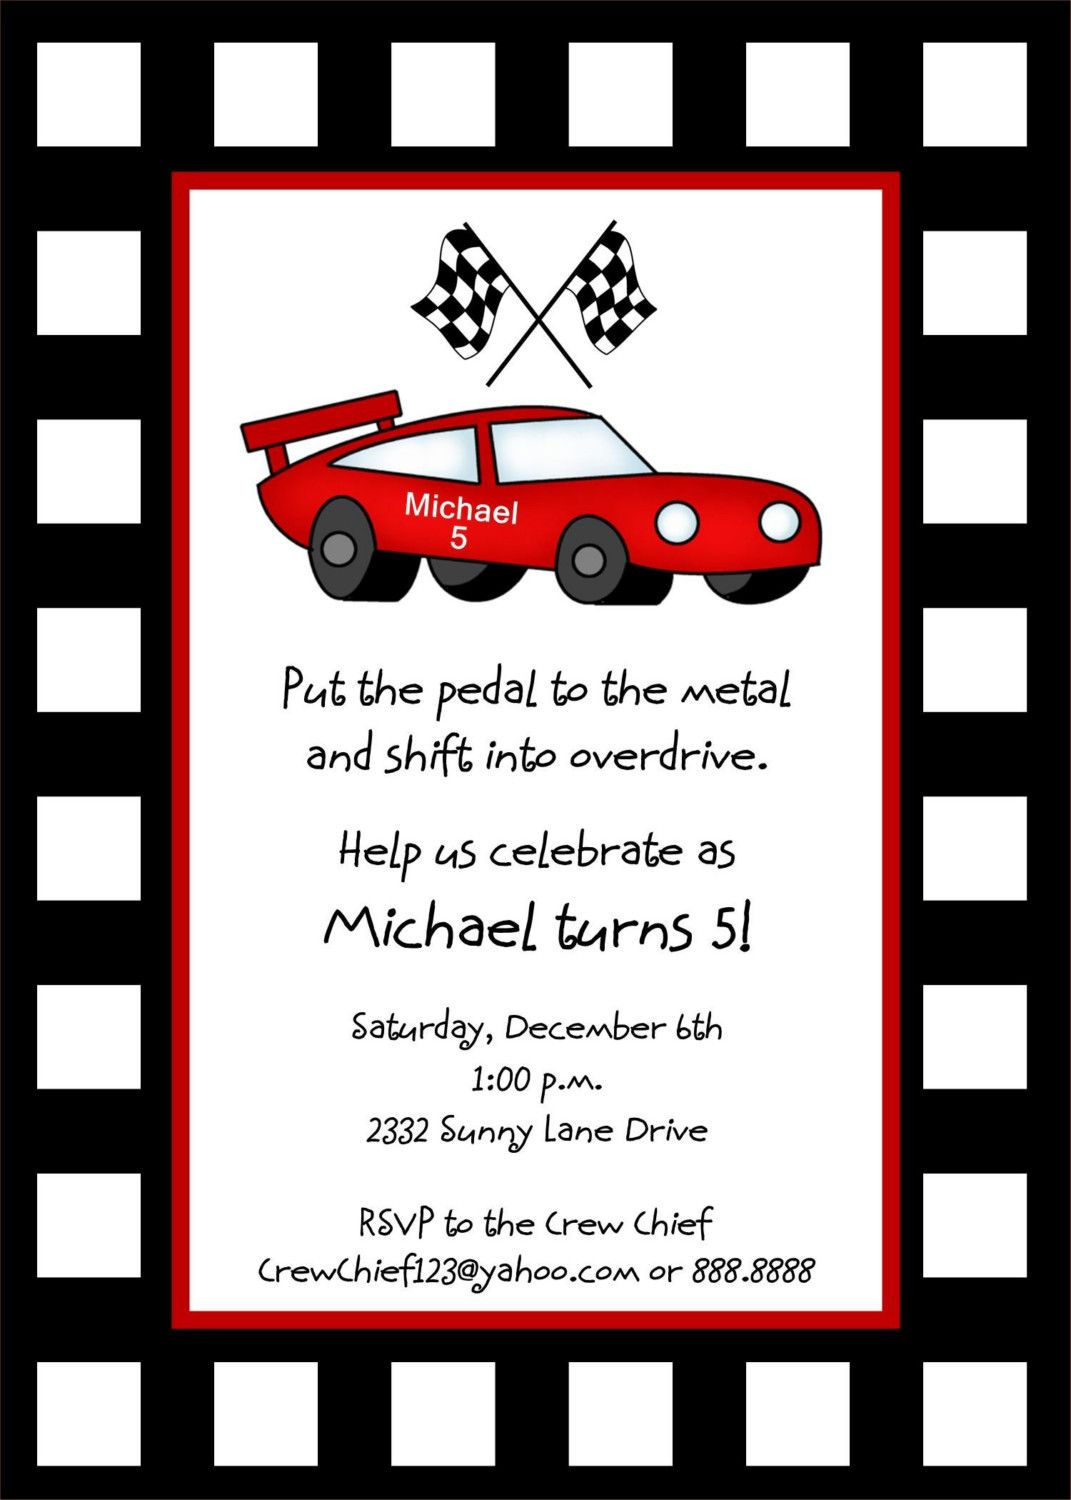 Race Car Invitation Template Free Birthday Ideas In 2019 Cars intended for dimensions 1071 X 1500